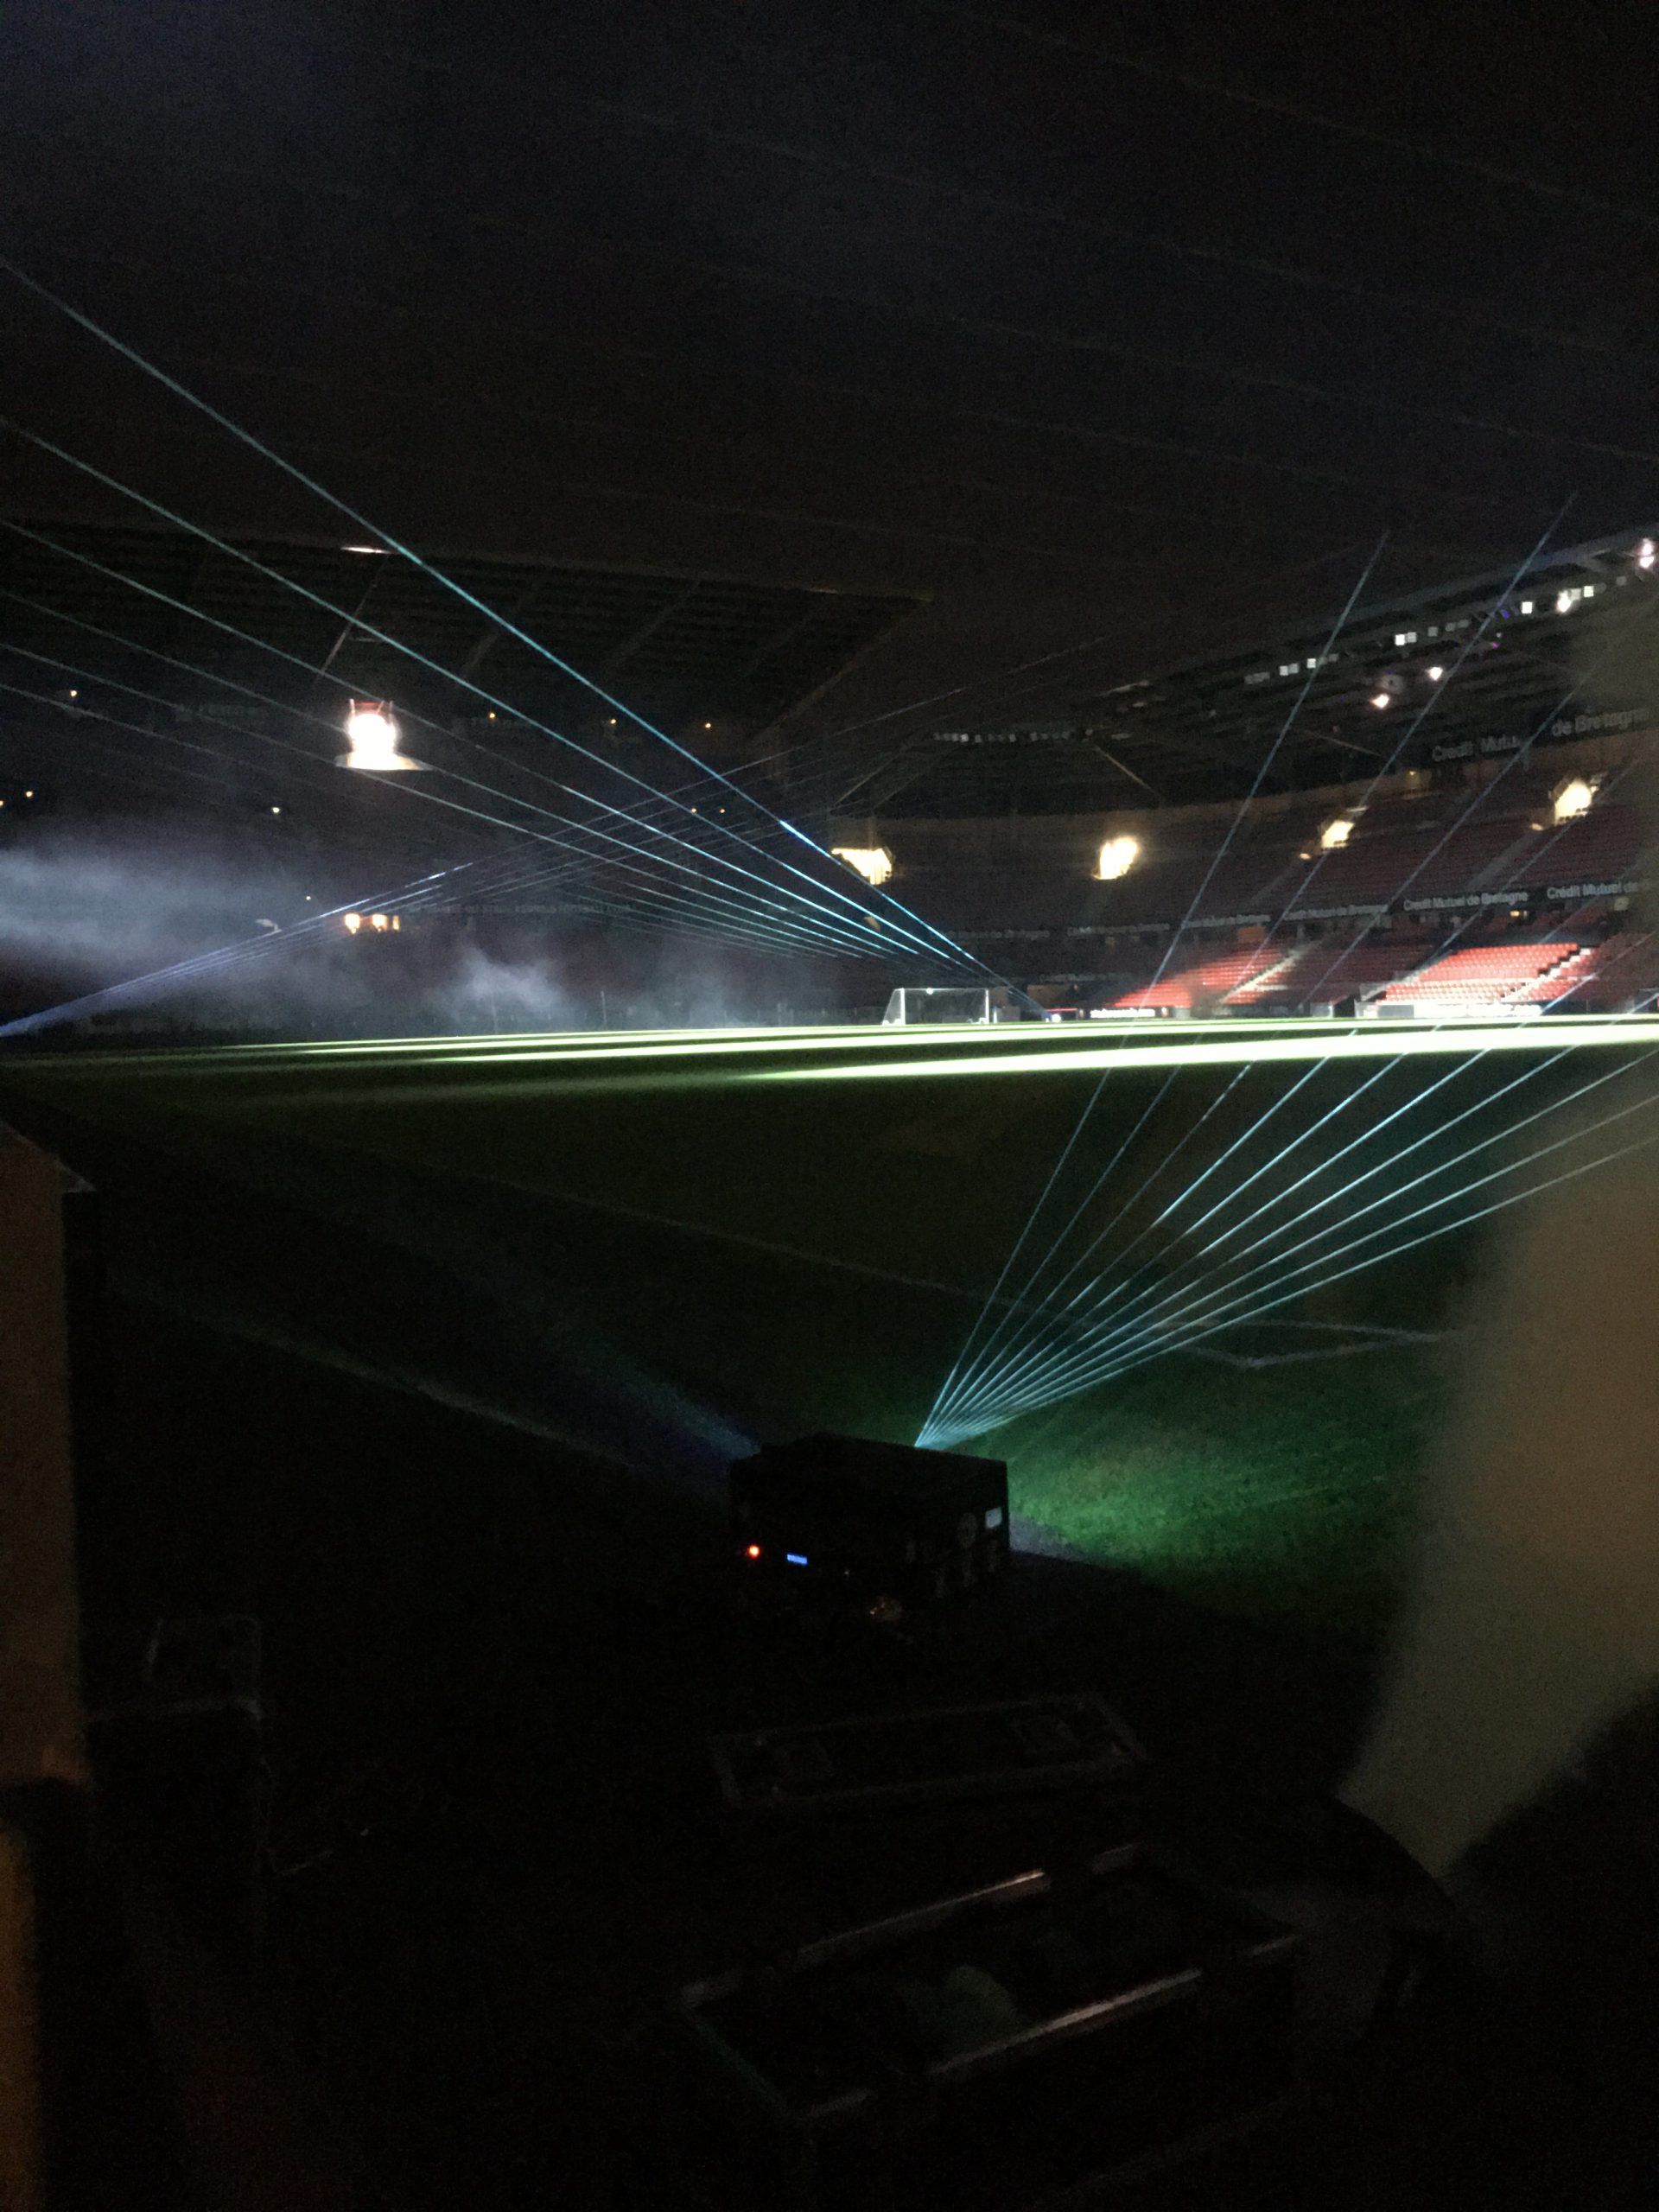 Photo of a stadium with laser beams projected skyward